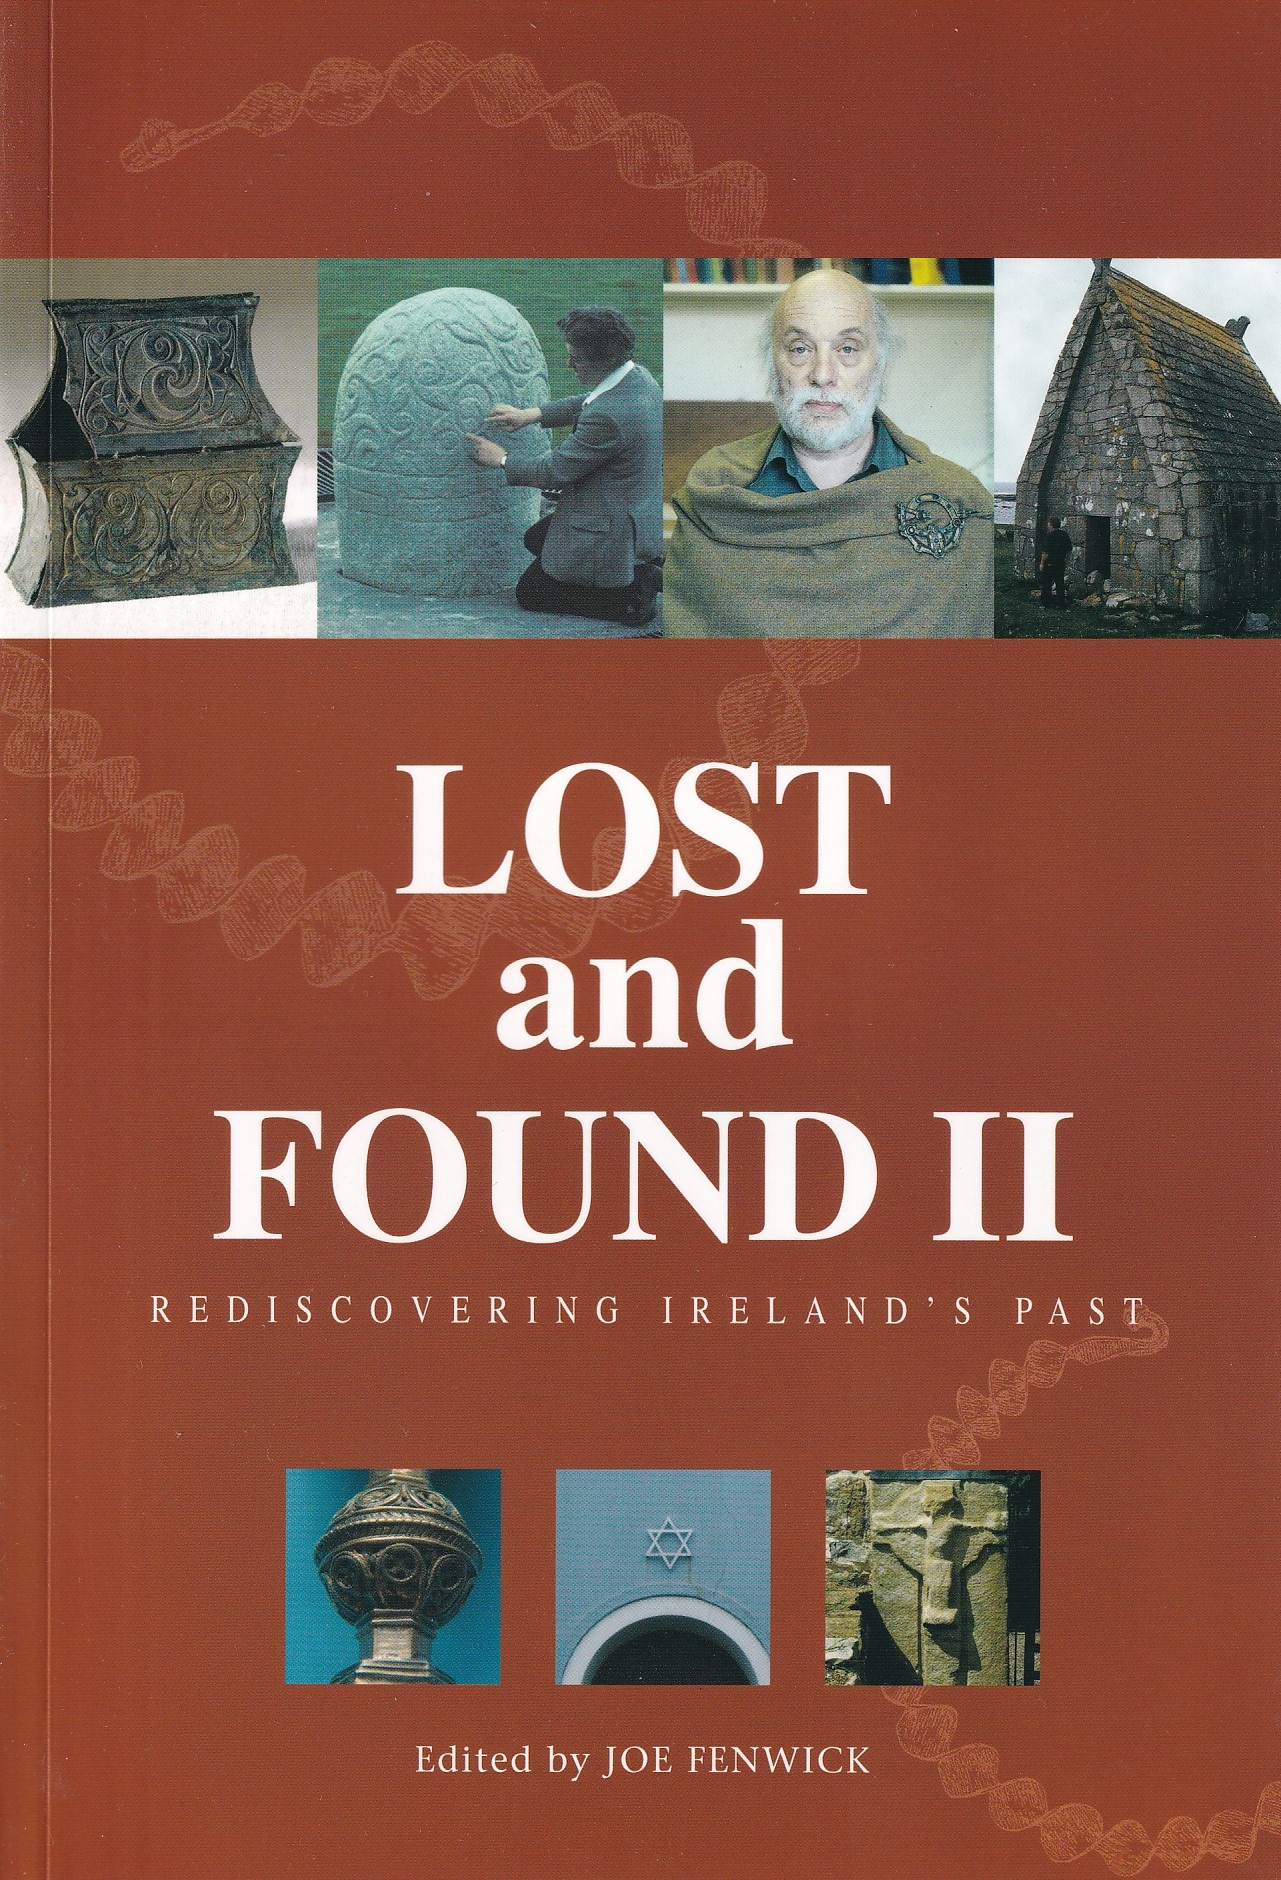 Lost and Found II: Rediscovering Ireland’s Past | Joe Fenwick (ed.) | Charlie Byrne's